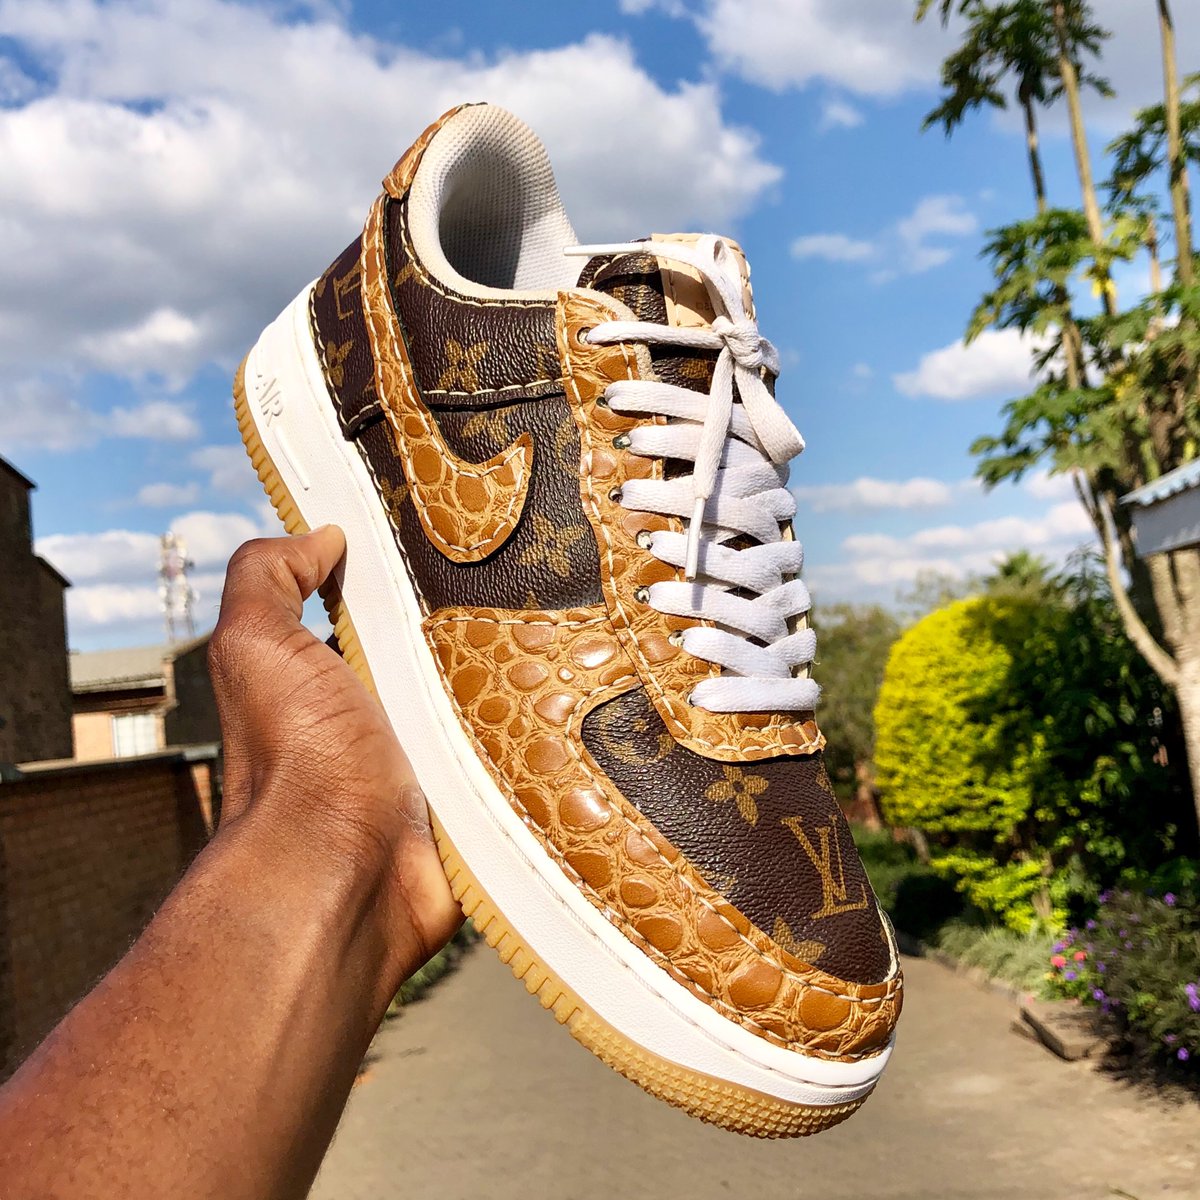 CareAboutNone [CAN] custom designs. “Rejected Stone” Louis Vuitton Airforce1 custom. Handcrafted by @careaboutnone 
F1:Before
F2’3’4: After